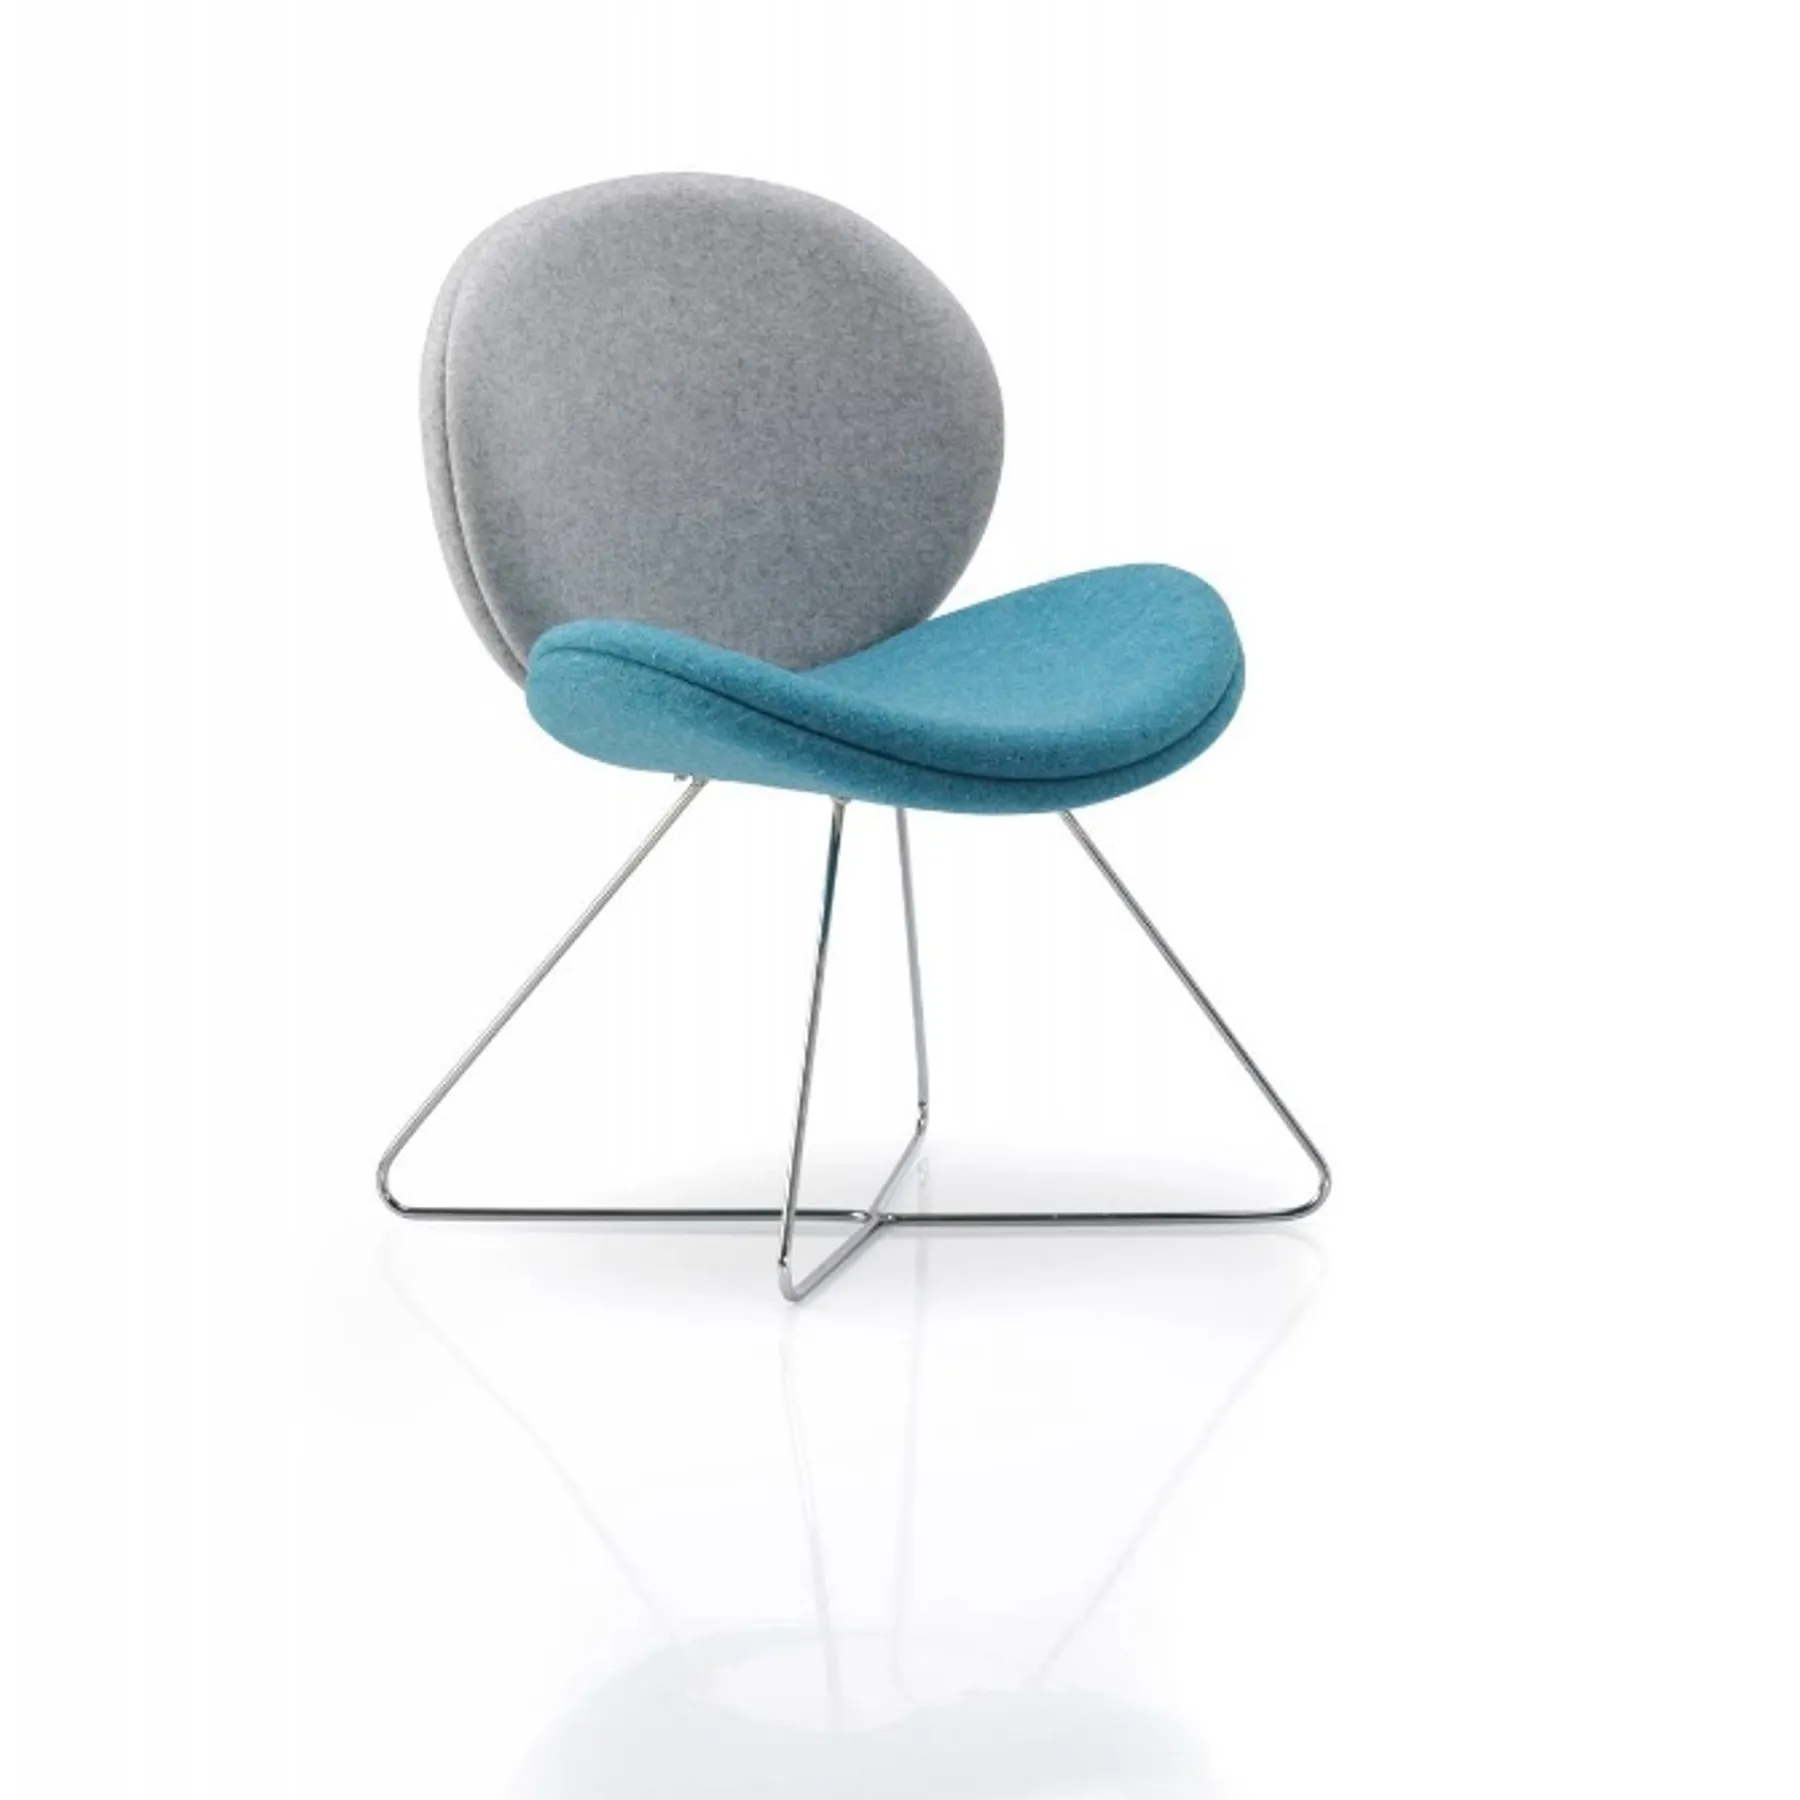 Lof Direct Giggle Chair ocee design giggle4 blue grey